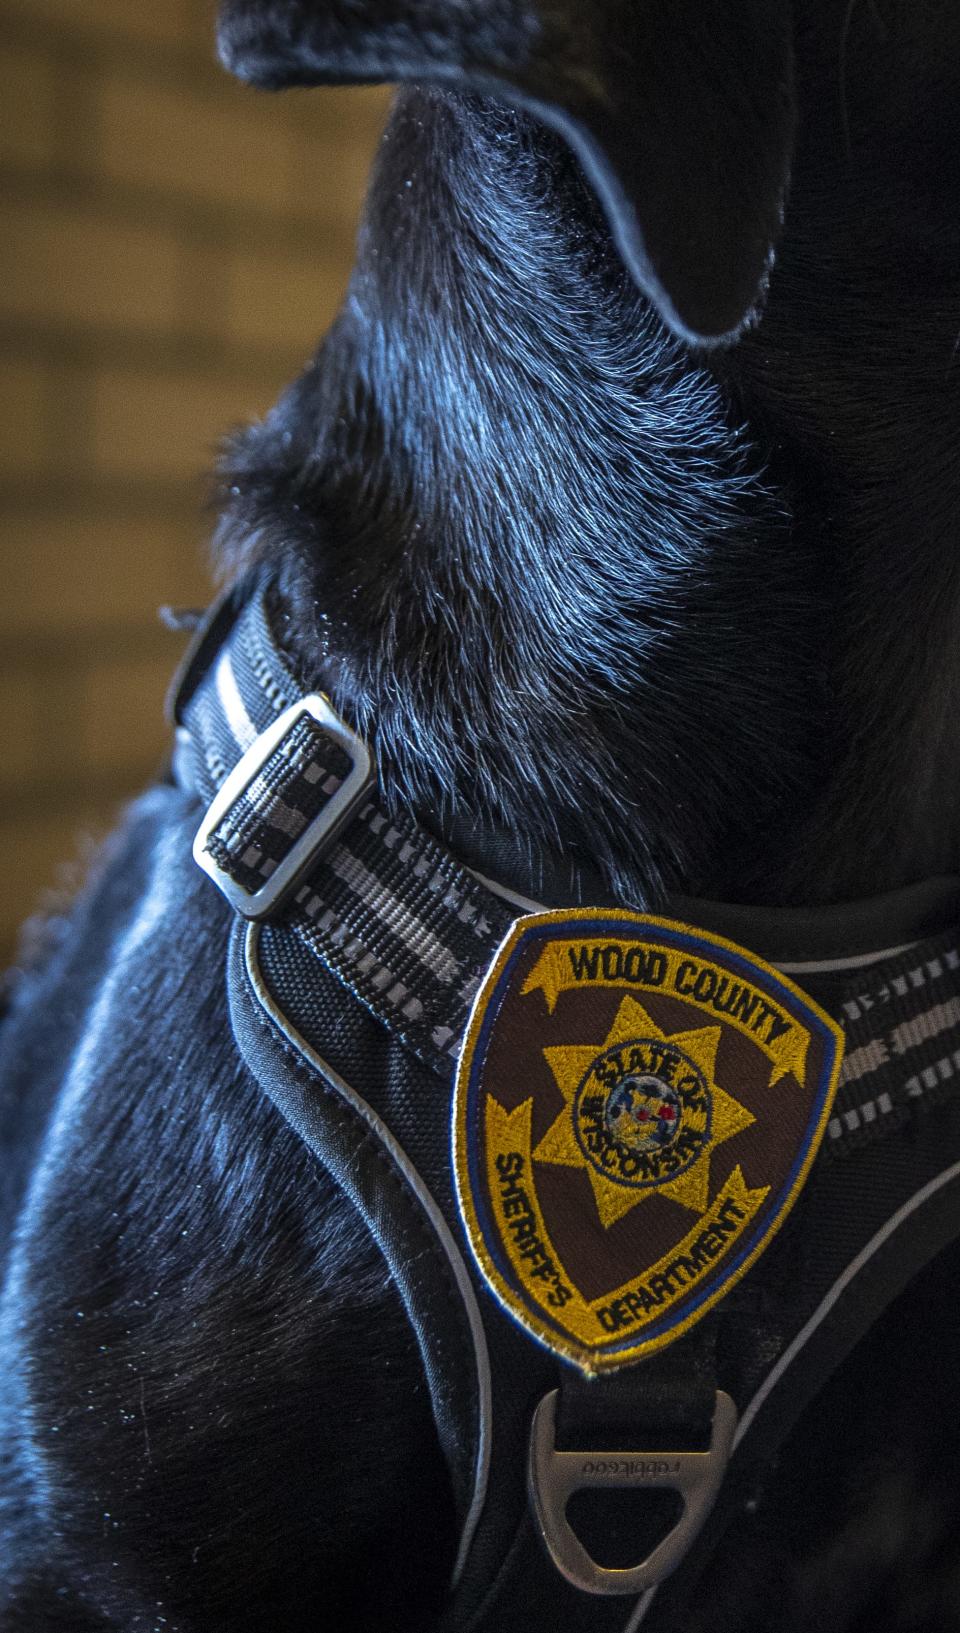 Lola, a 12-week-old black lab, shows off her Wood County Sheriff's Office badge on Feb. 15 at the Wood County Jail in Wisconsin Rapids.